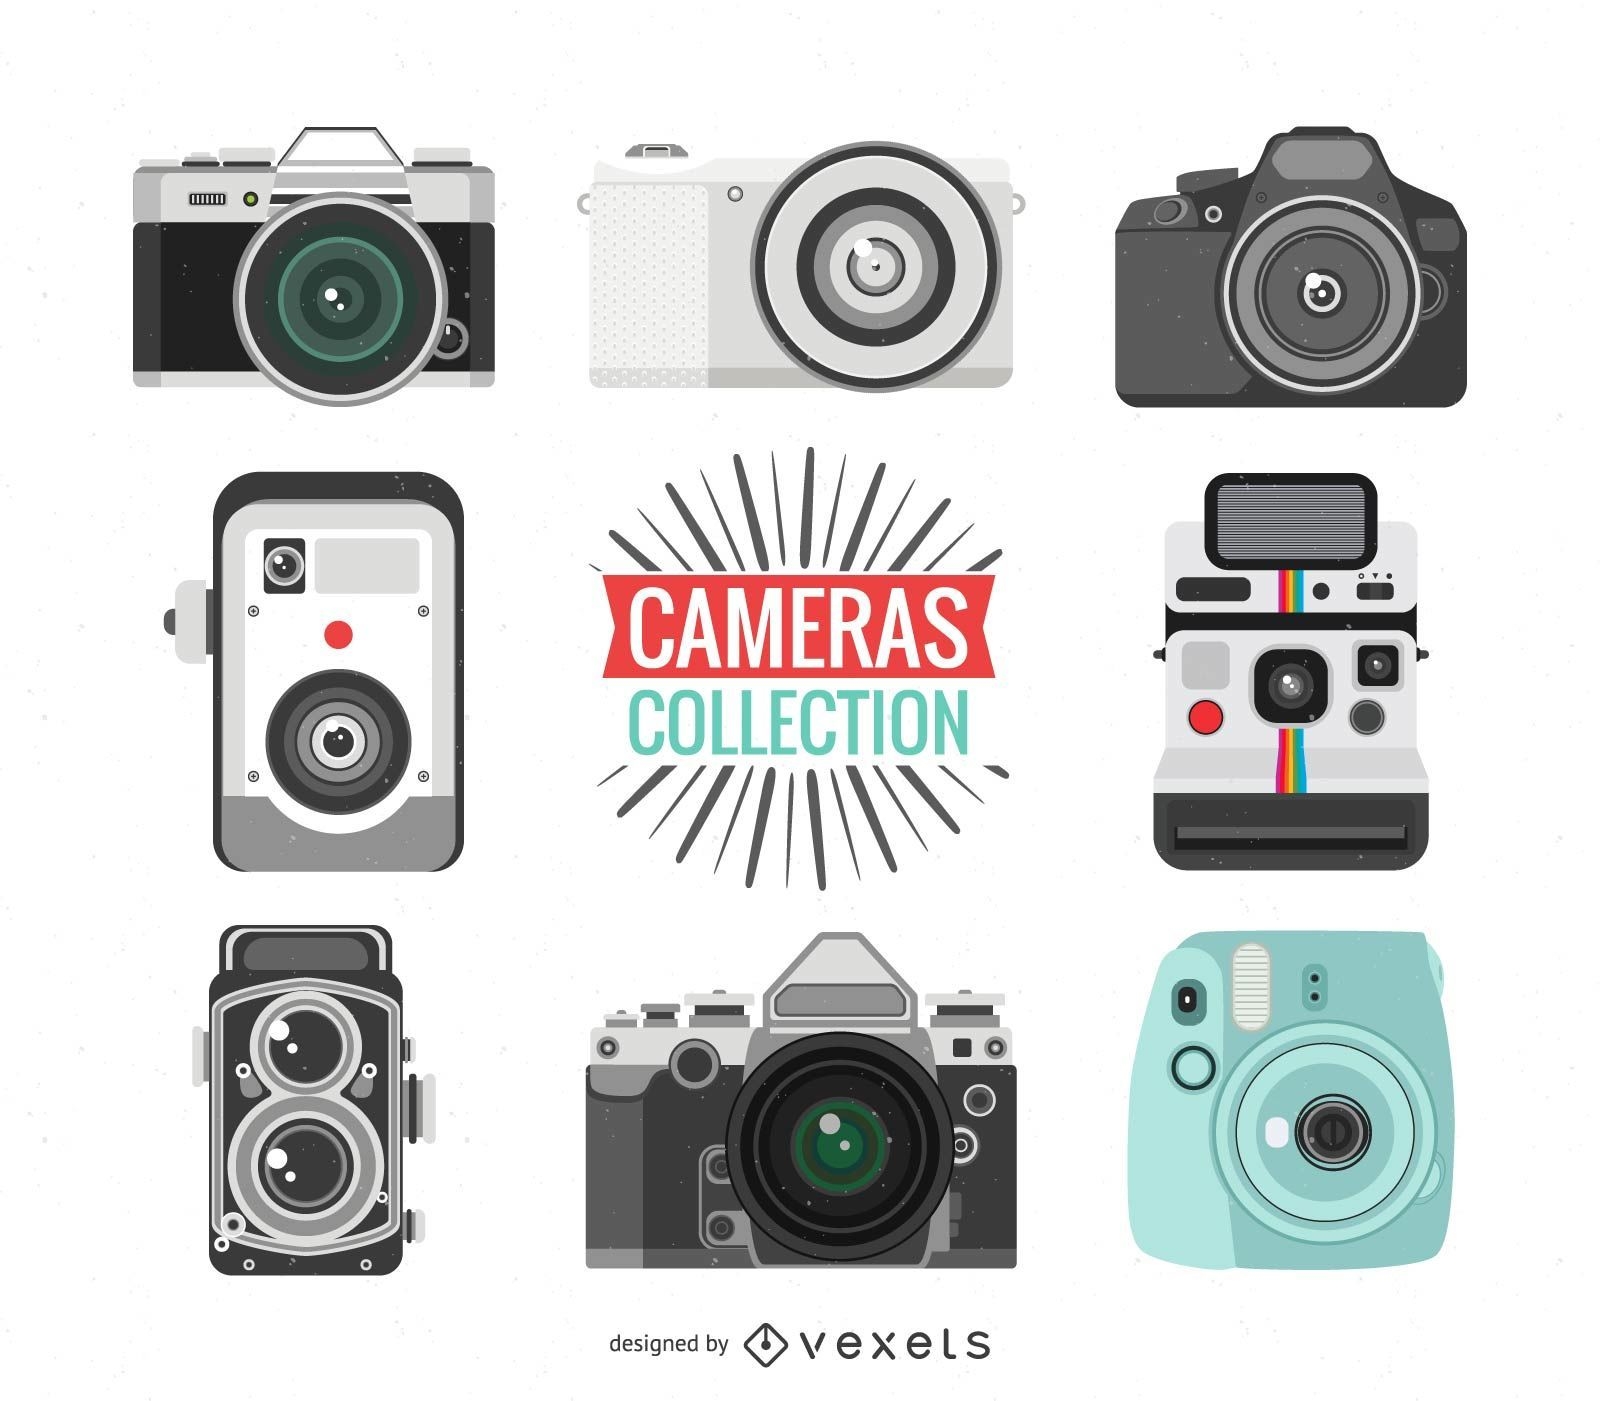 Collection of vintage camera illustrations